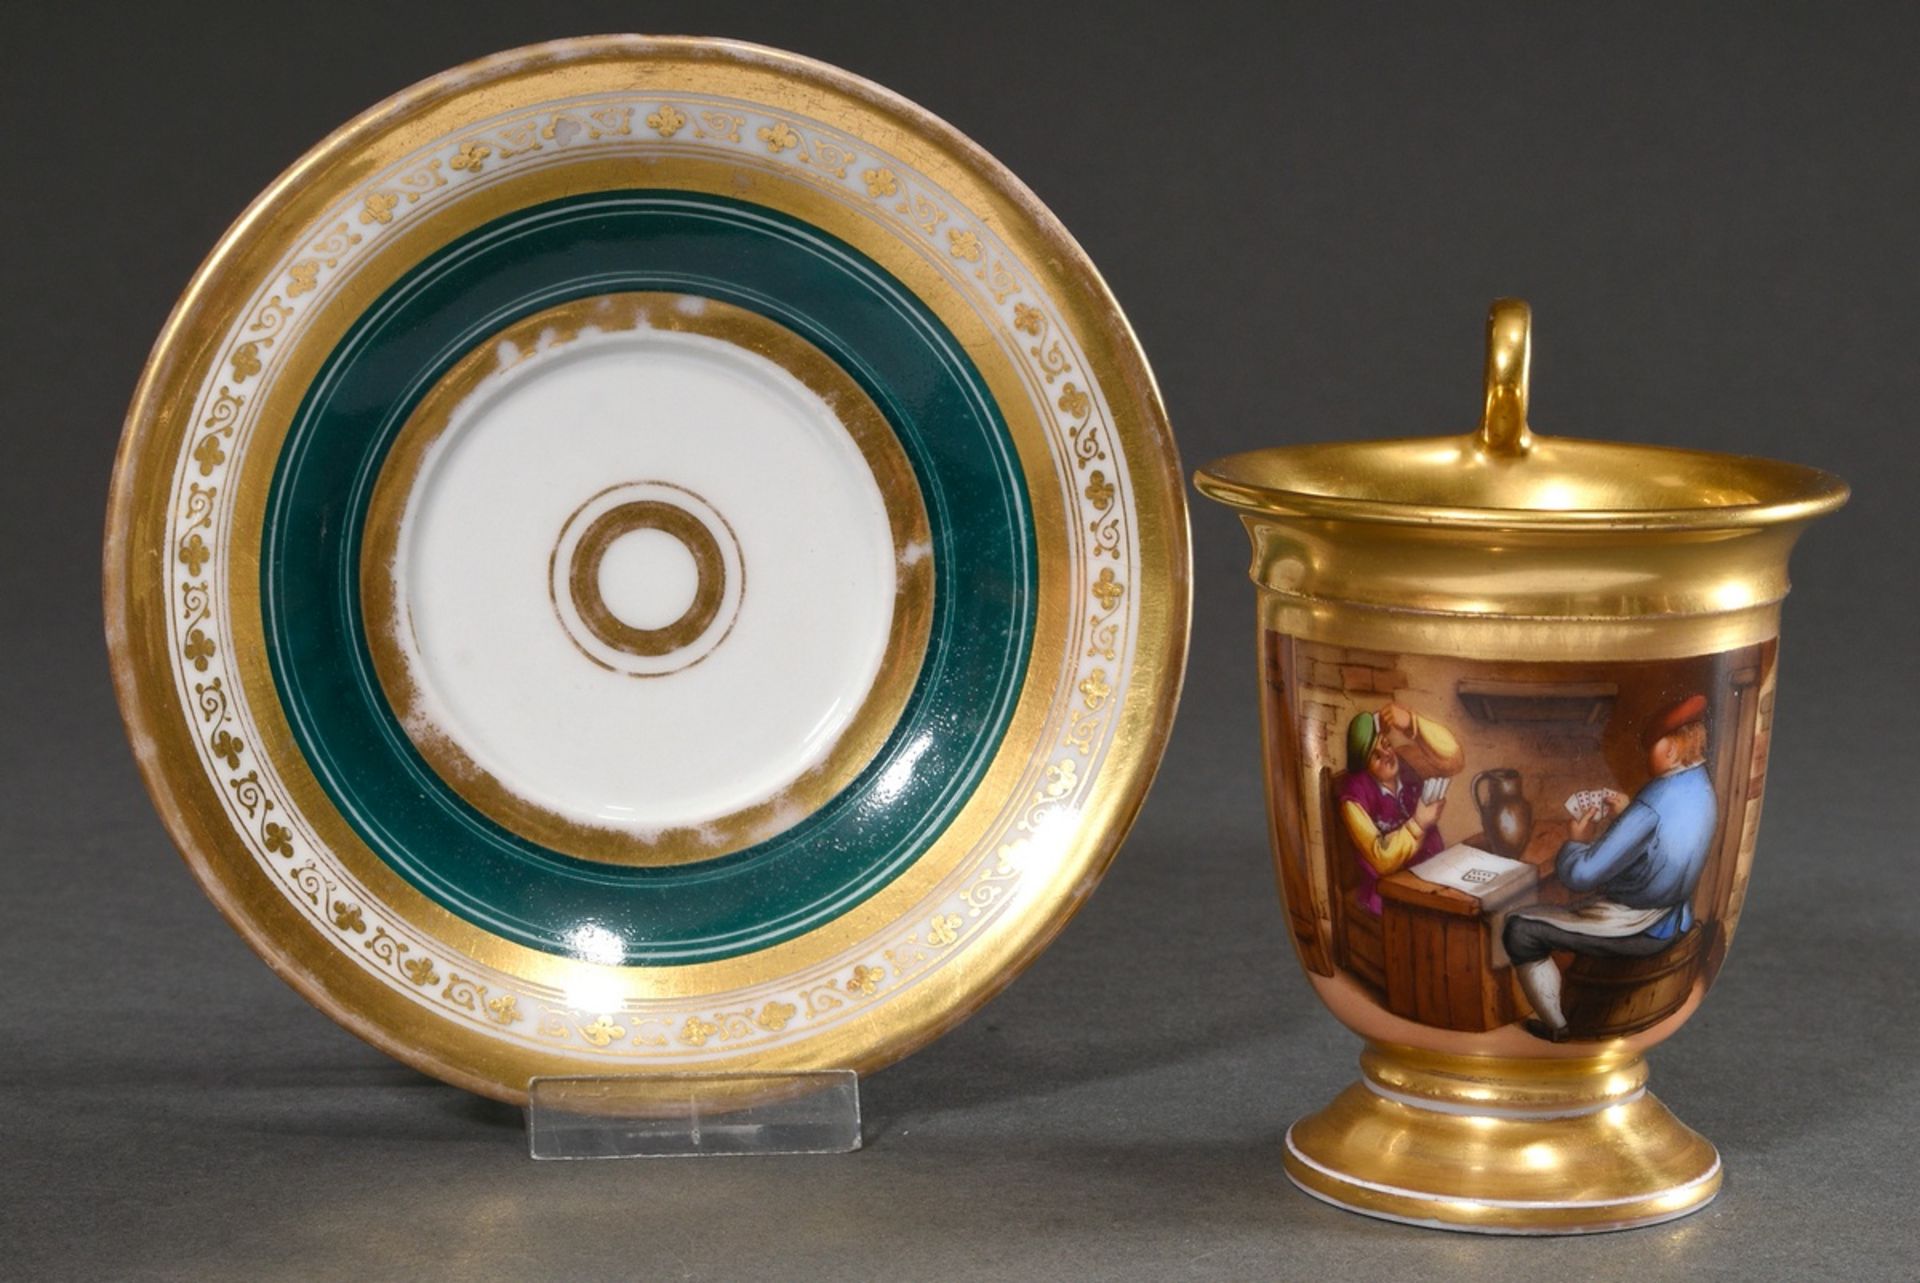 Biedermeier cup with painted cartouche "Card Player" on dark green background with floral and gold 